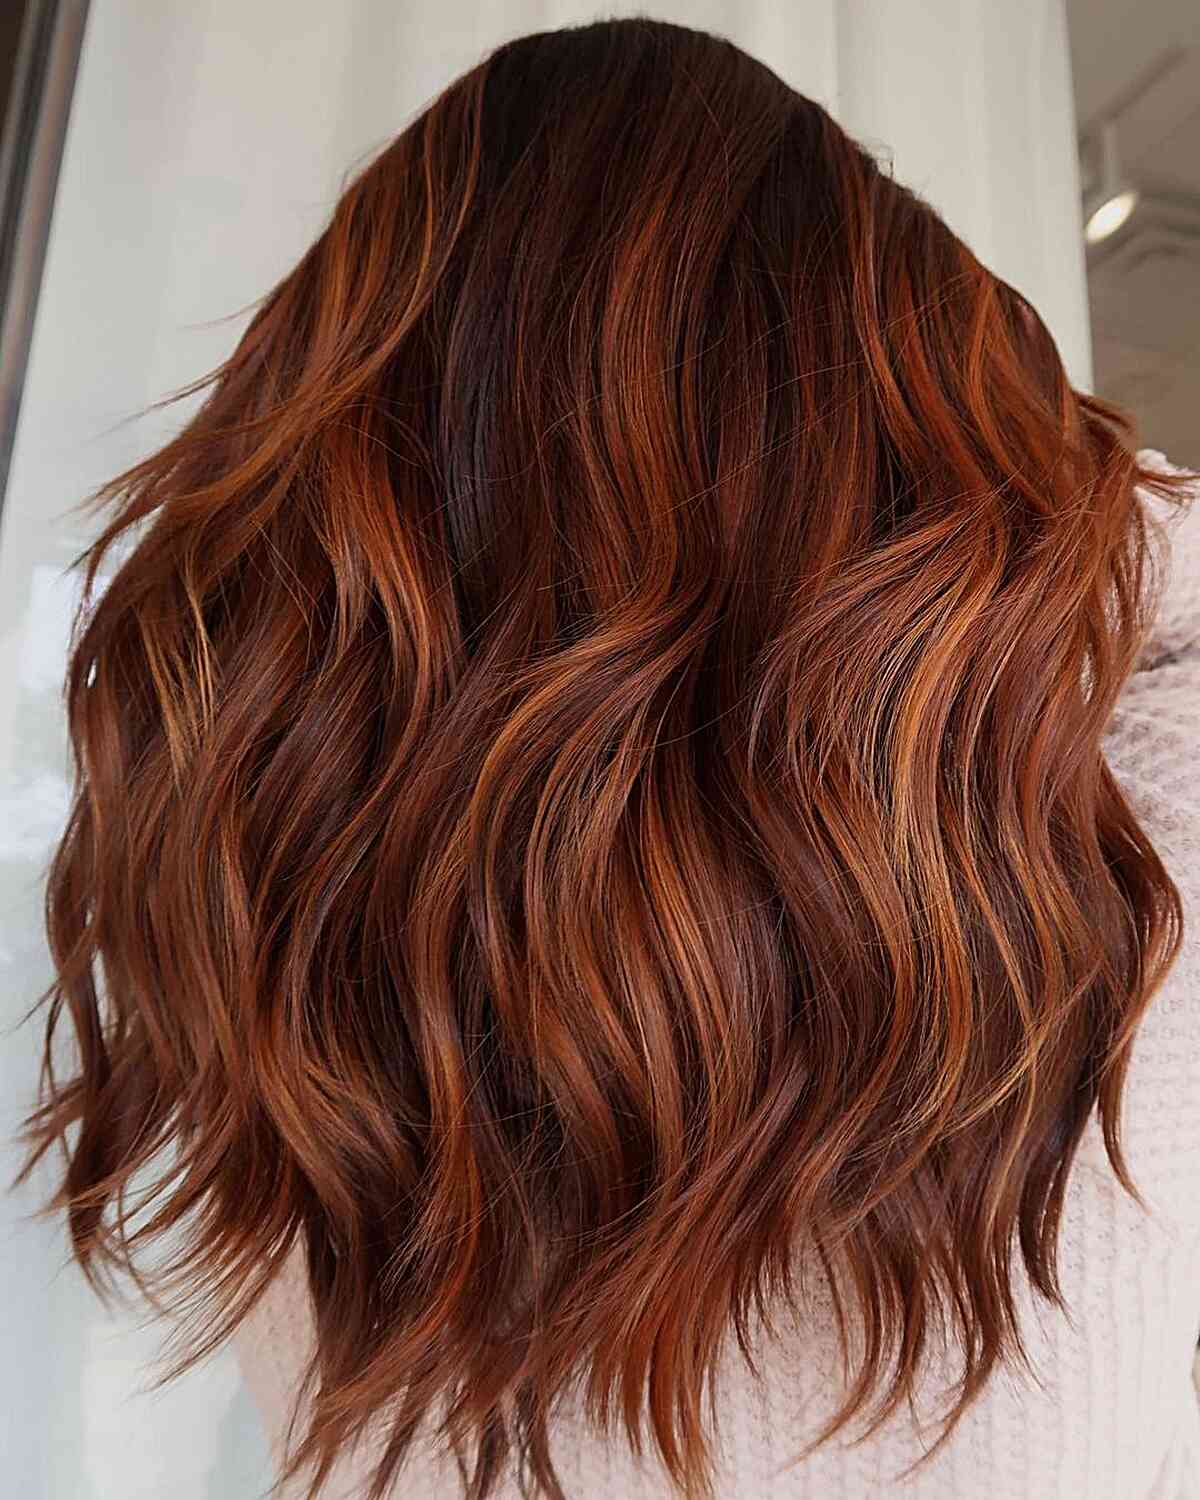 High Contrast Red Balayage Hair for women with thick mid-length hair